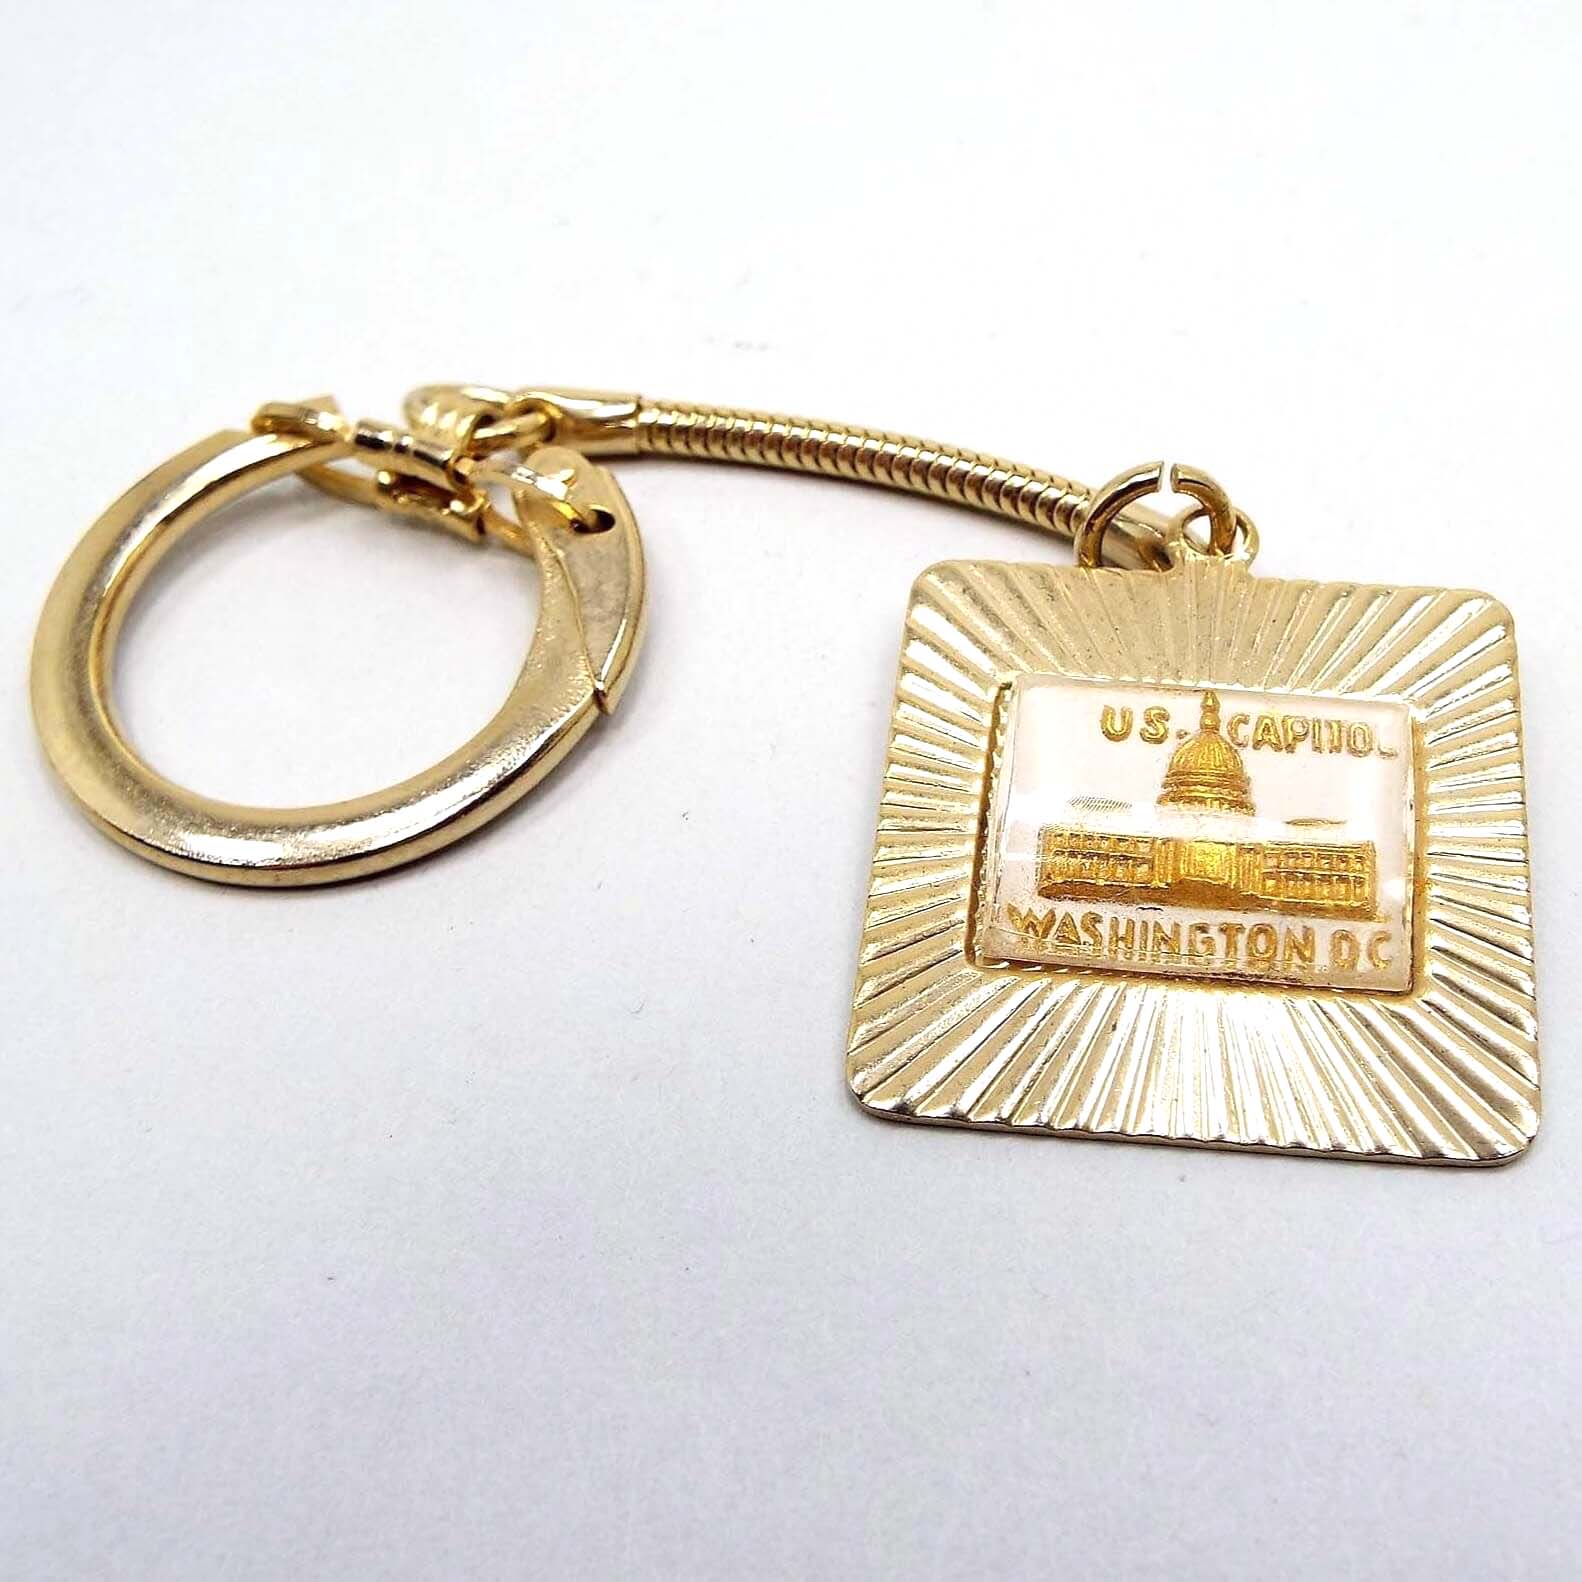 Front view of the Mid Century vintage keychain. The metal is gold tone in color. One end has a latched ring to open and put your keys on. There is a snake chain down to the other end that is square shaped with a plastic cab in the middle. The plastic is clear and shows a raised metallic gold design of the Capitol Building and wording that says "US Capitol Washington DC." The outer edge has textured lines going outward at an angle.